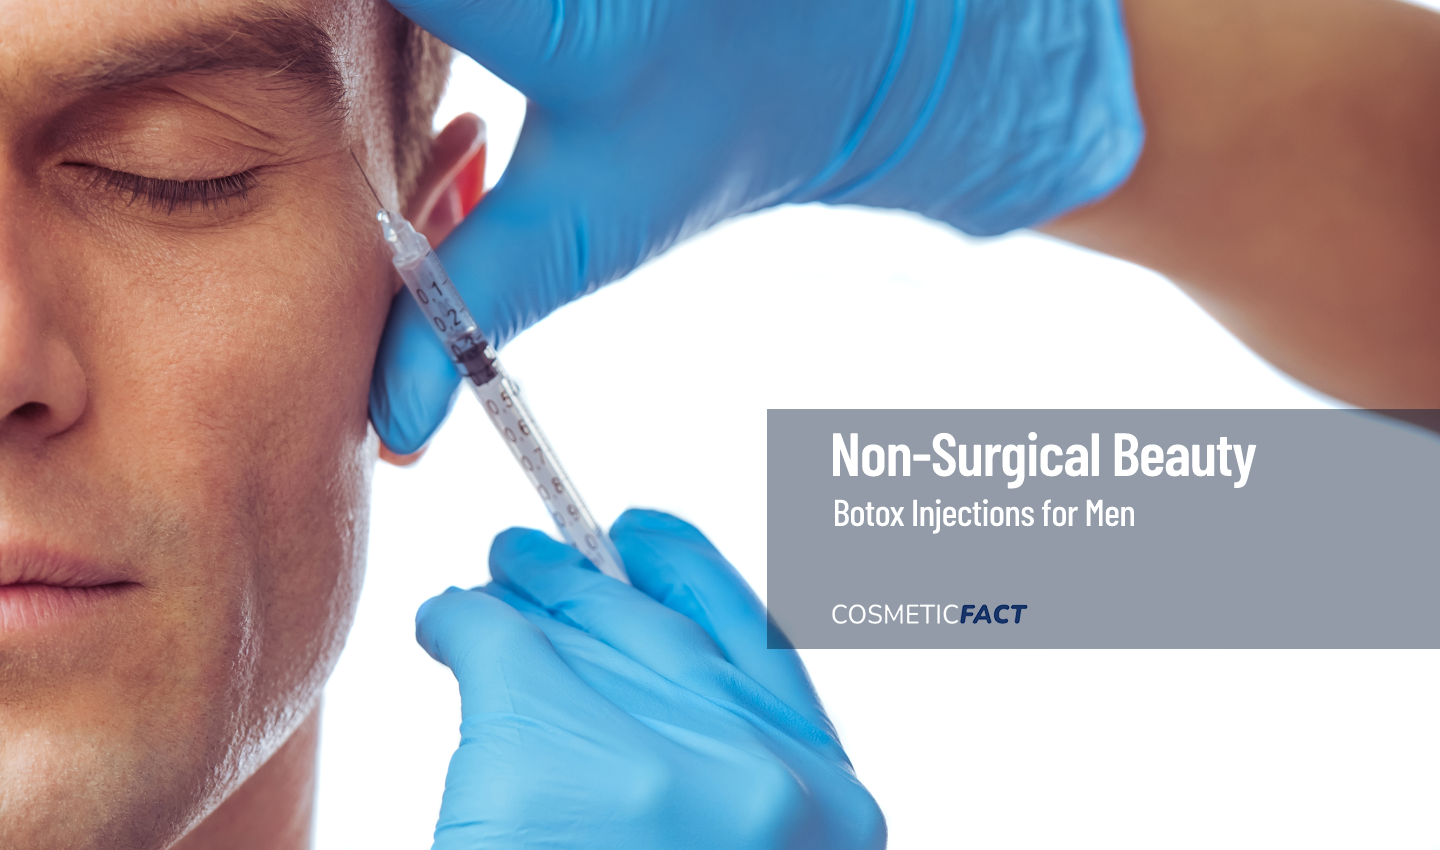 A male patient receiving Botox injection from a doctor on his forehead, with the text "Botox injections for men" emphasized.